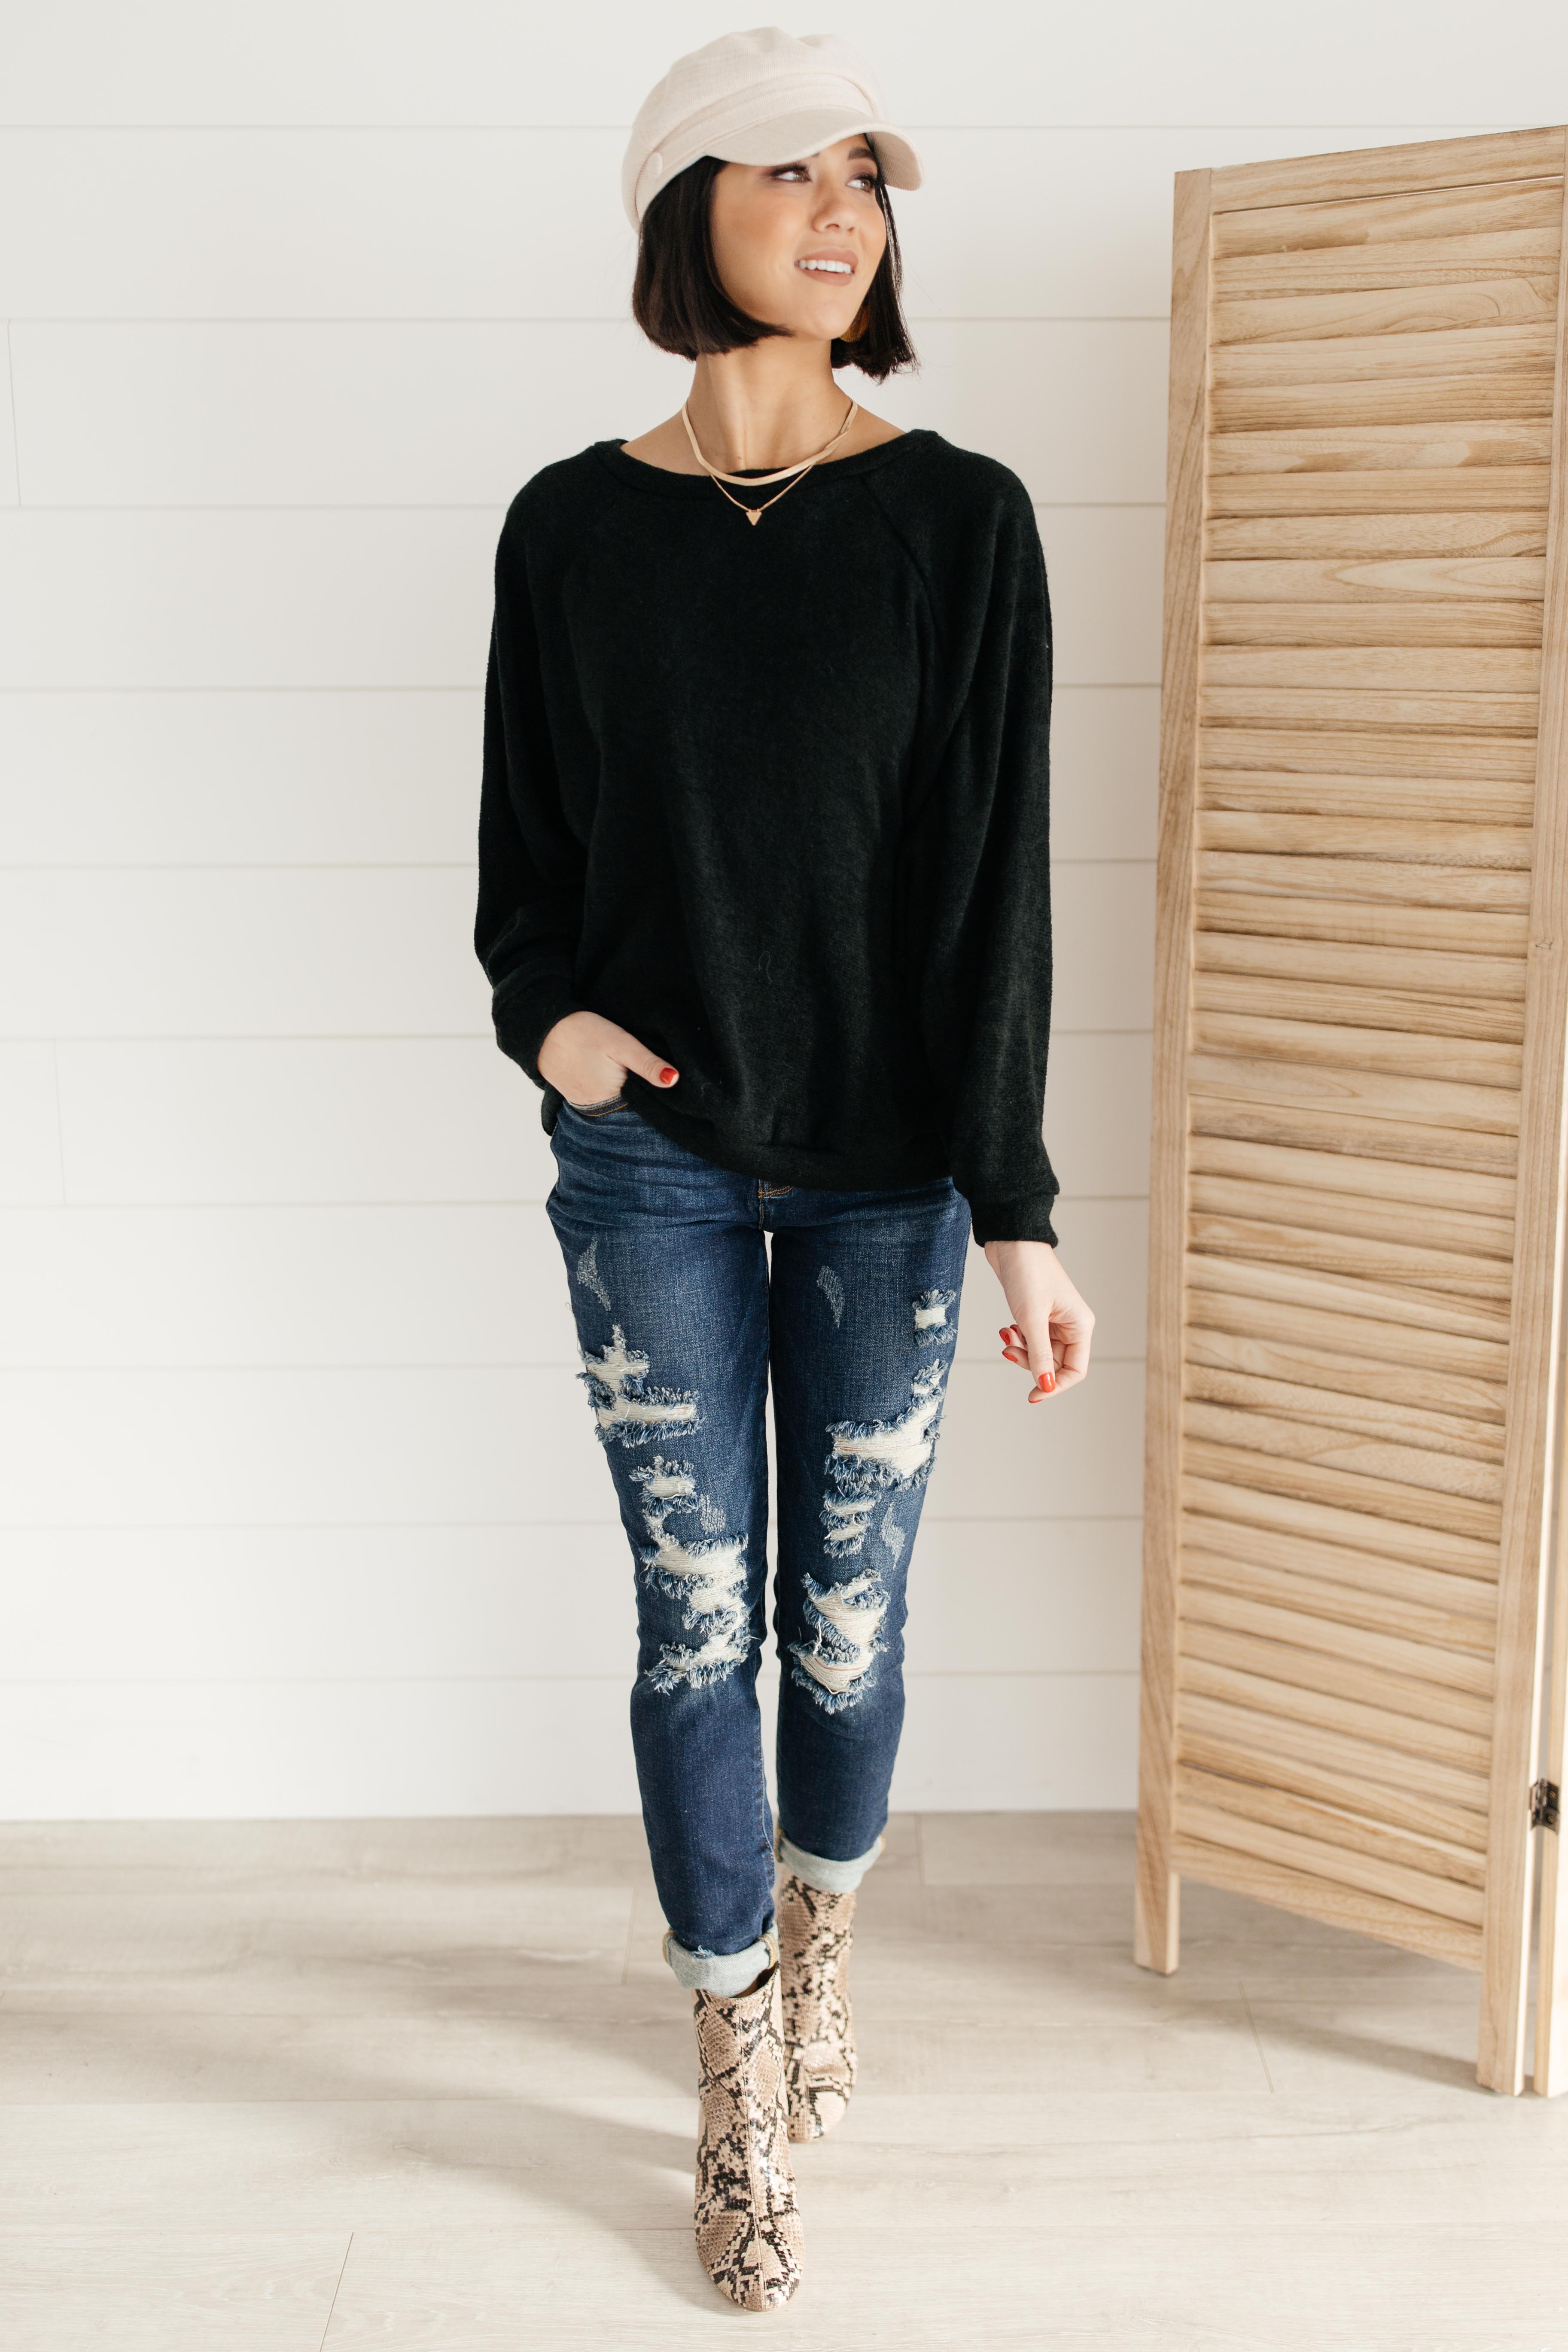 Simple Sass Top in Black